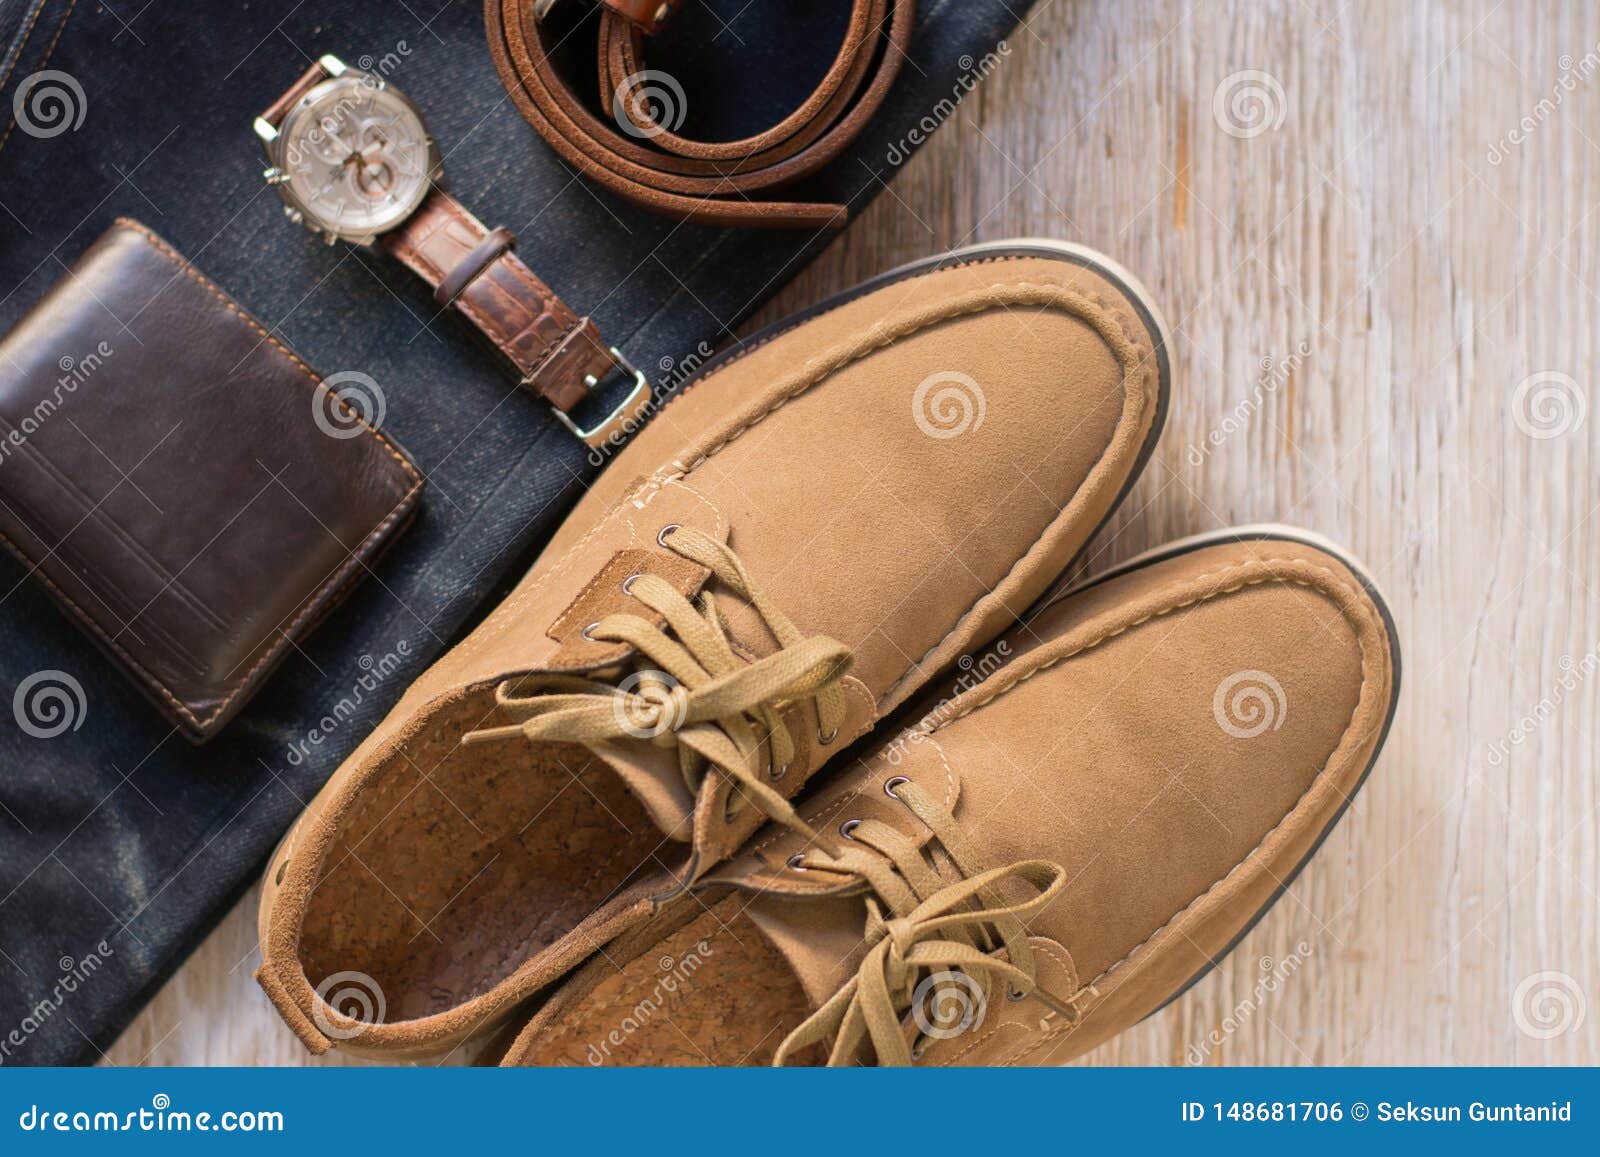 Pin on Men, Clothes, Shoes and Accessories